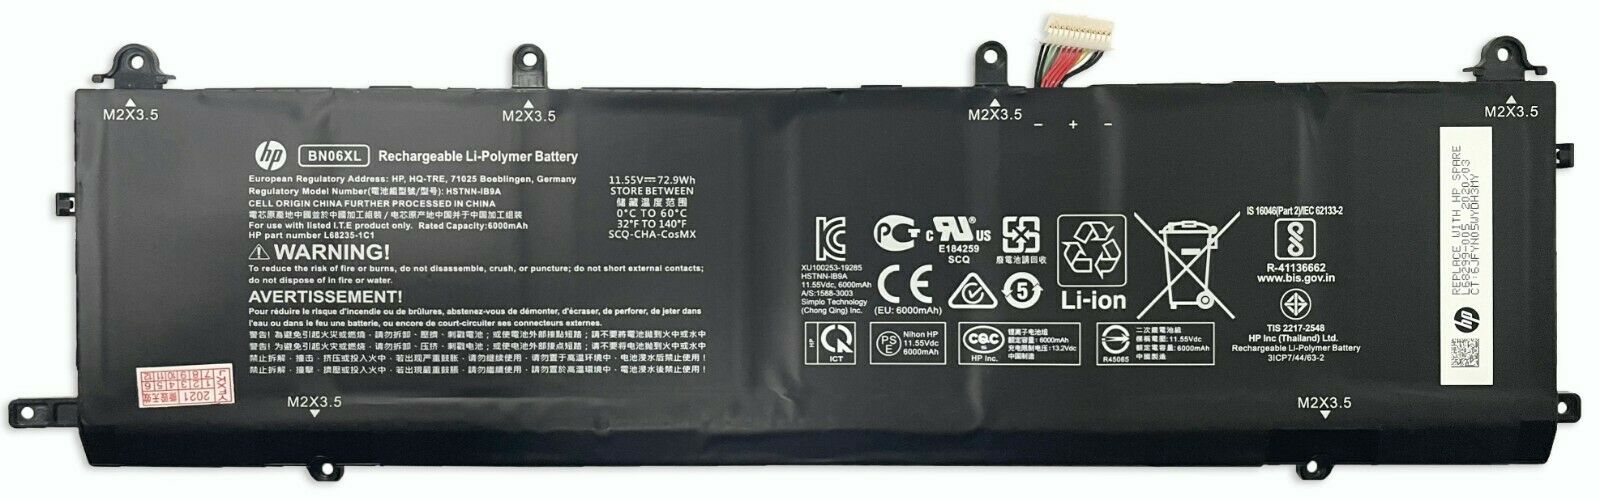 HP Spectre x360 15-eb0007ur Battery 6-cell 72.9Wh